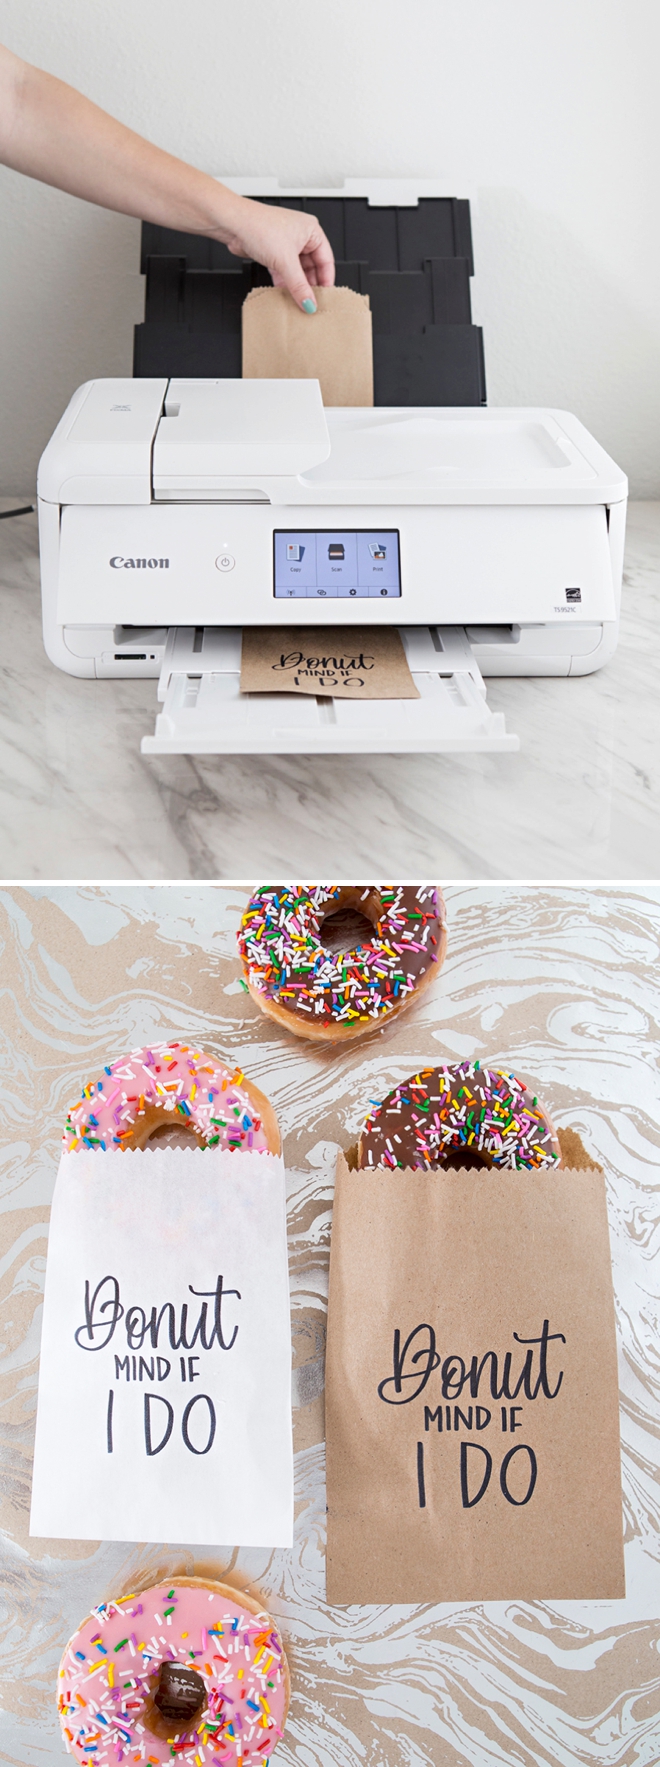 Print your own Donut Mind If I Do treat bags!